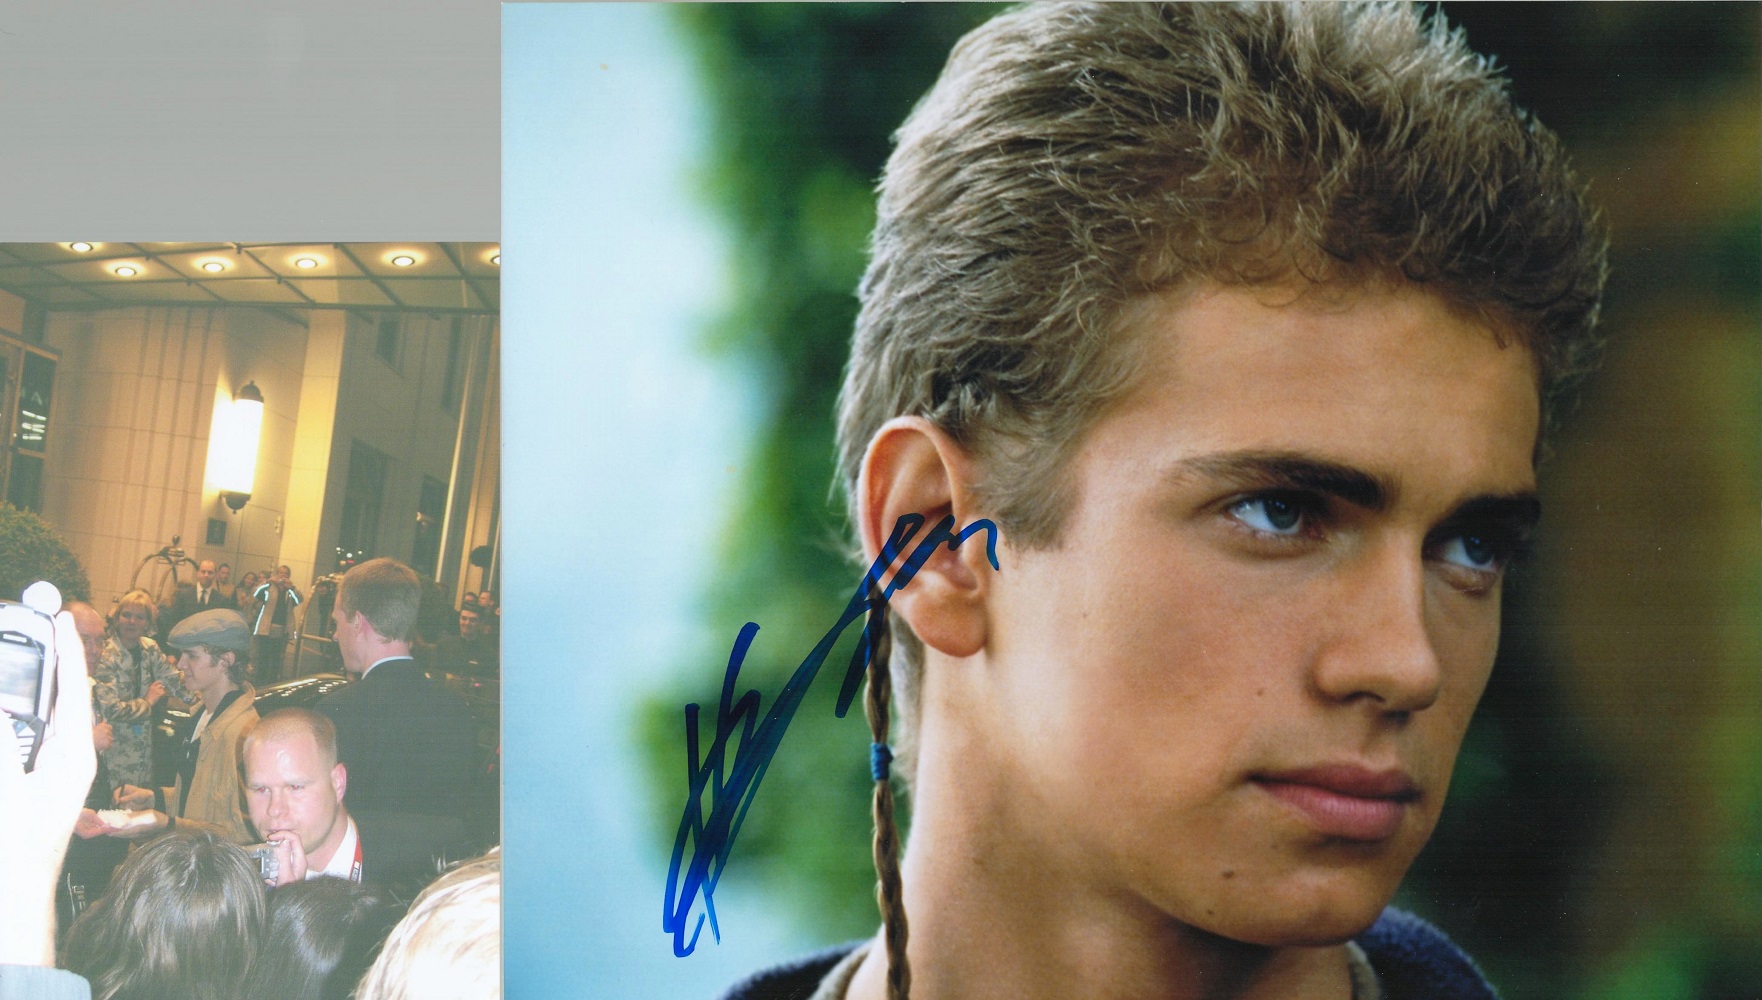 Star Wars, Hayden Christensen signed 10x8 colour photograph plus 6x4 colour photograph from the